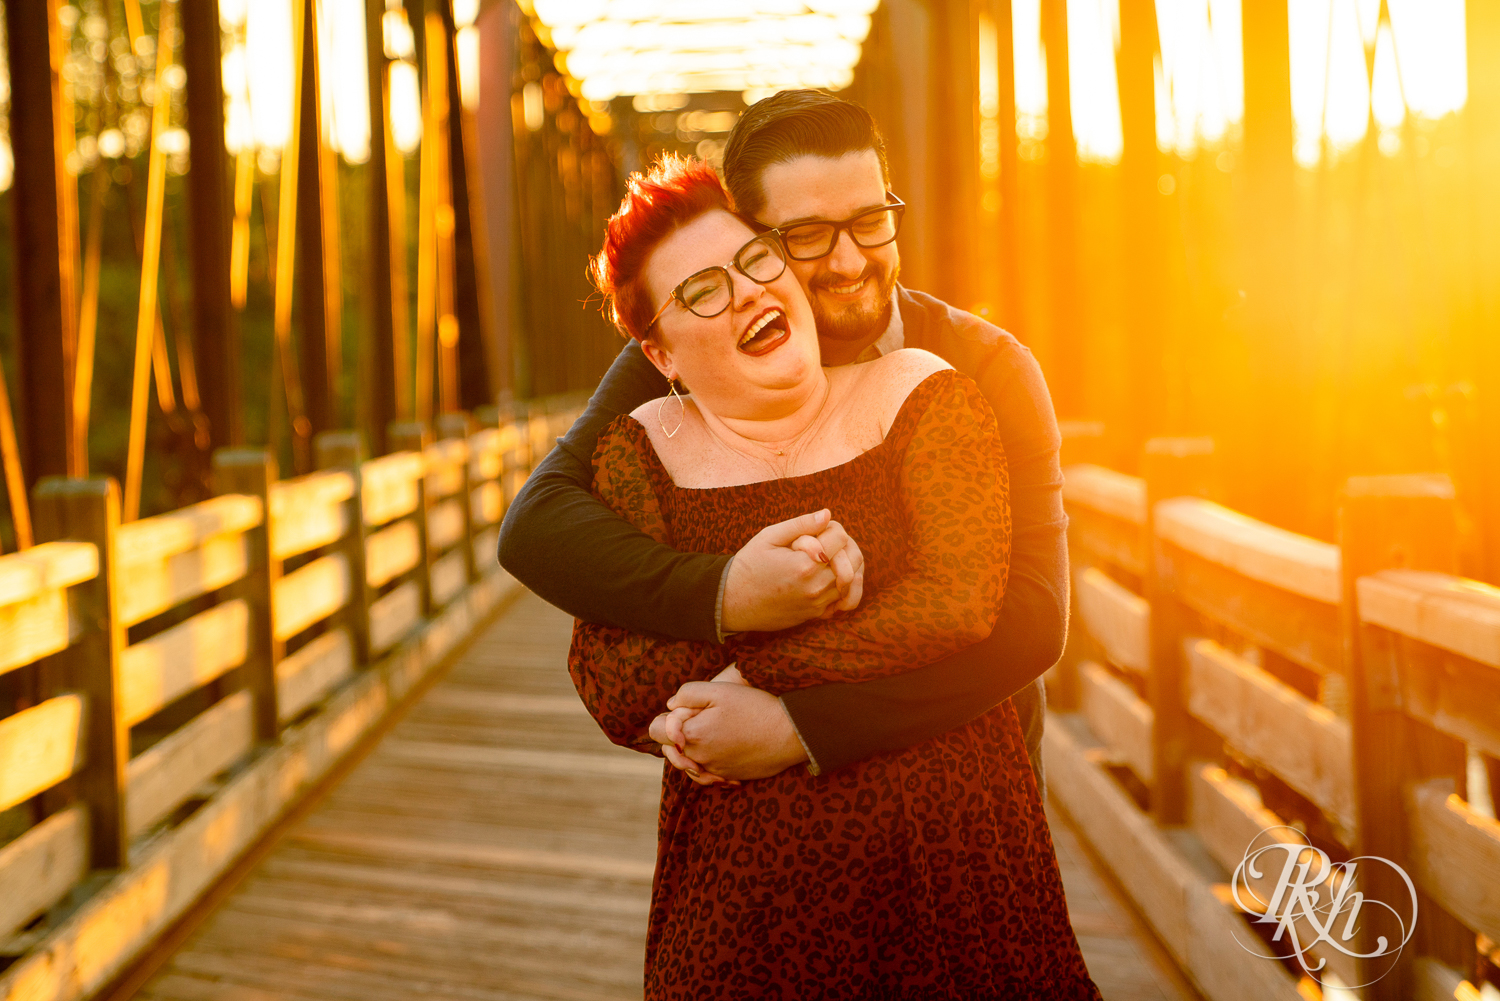 Man and woman with glasses and pixie red hair laughing at sunset in Phoenix Park in Eau Claire, Wisconsin.